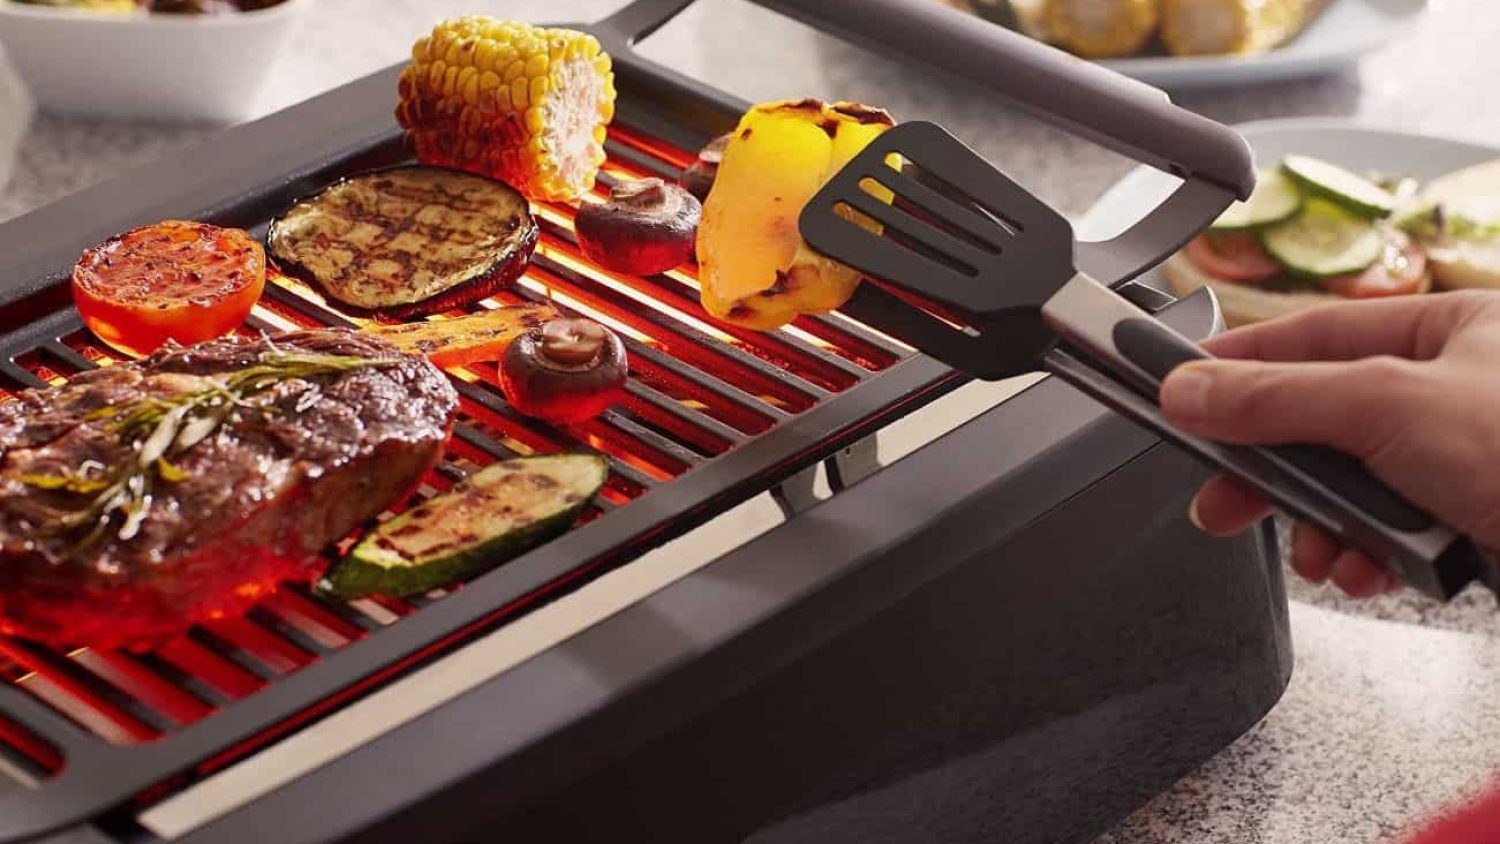 Best Smokeless BBQ: Enjoy Barbecuing With These 5 Grills